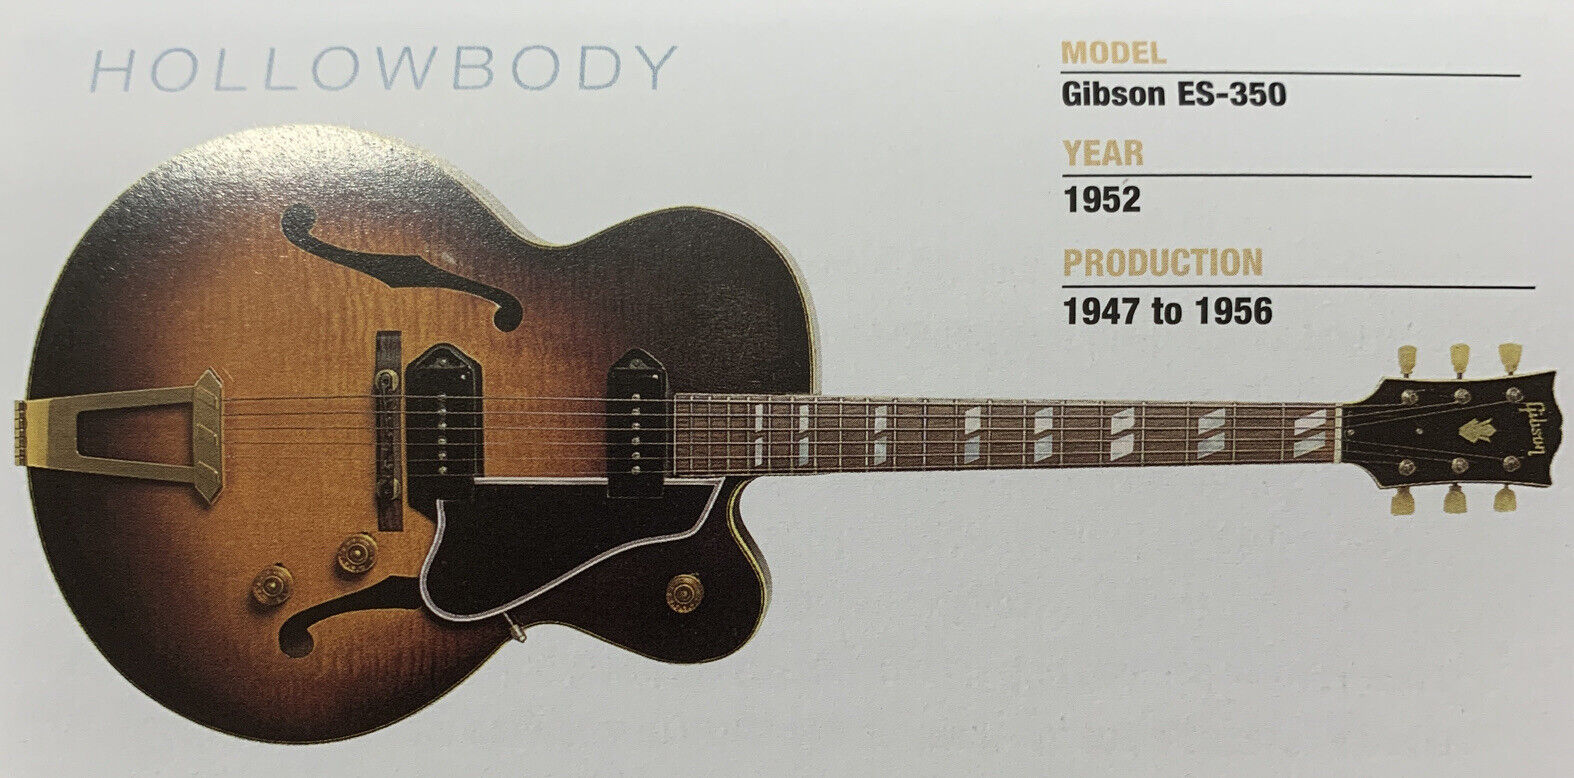 Primary image for 1952 Gibson ES-350 Hollow Body Guitar Fridge Magnet 5.25"x2.75" NEW